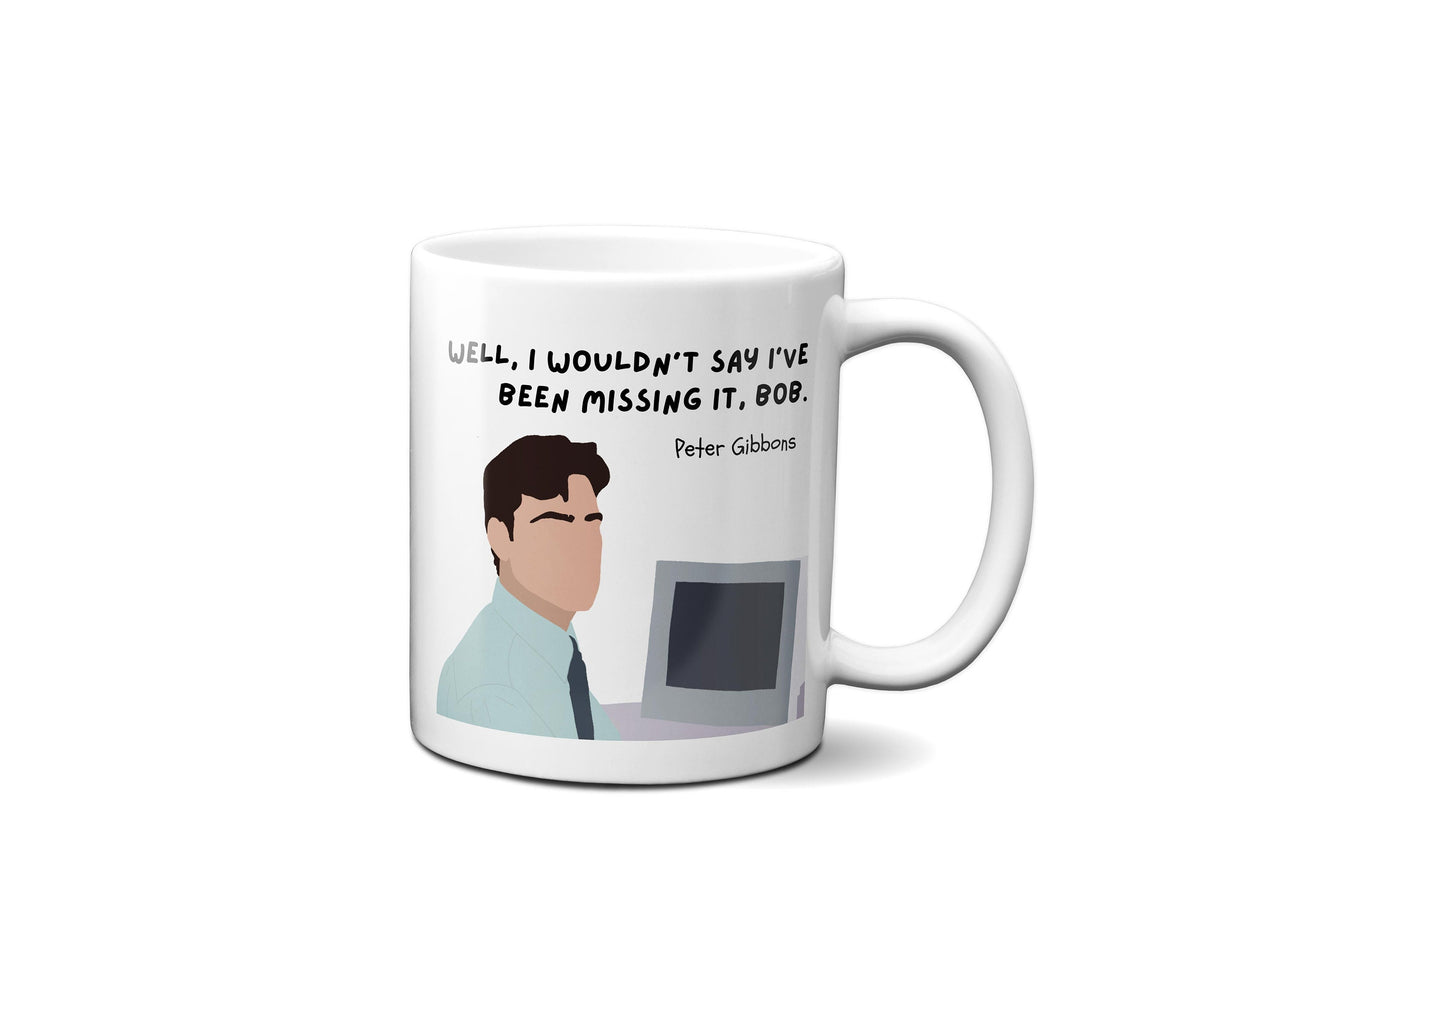 Well I wouldn't say I've been missing it Bob | Peter Gibbons Quote Mug | Office Space Mug